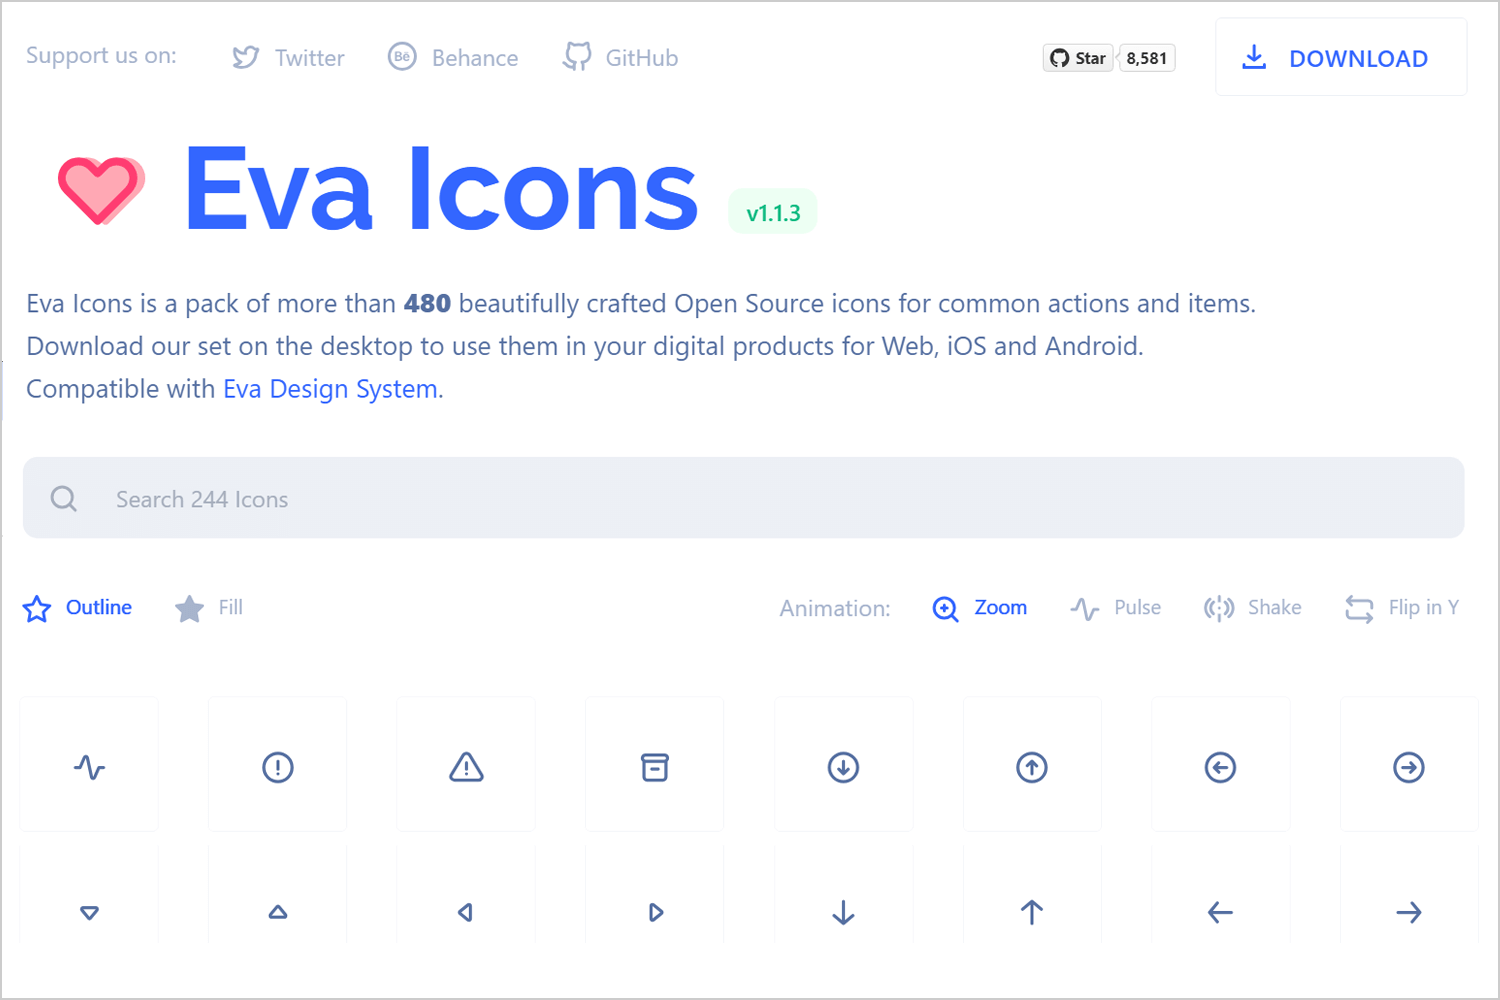 Eva Icons interface with options to search, animate, and style over 480 free icons